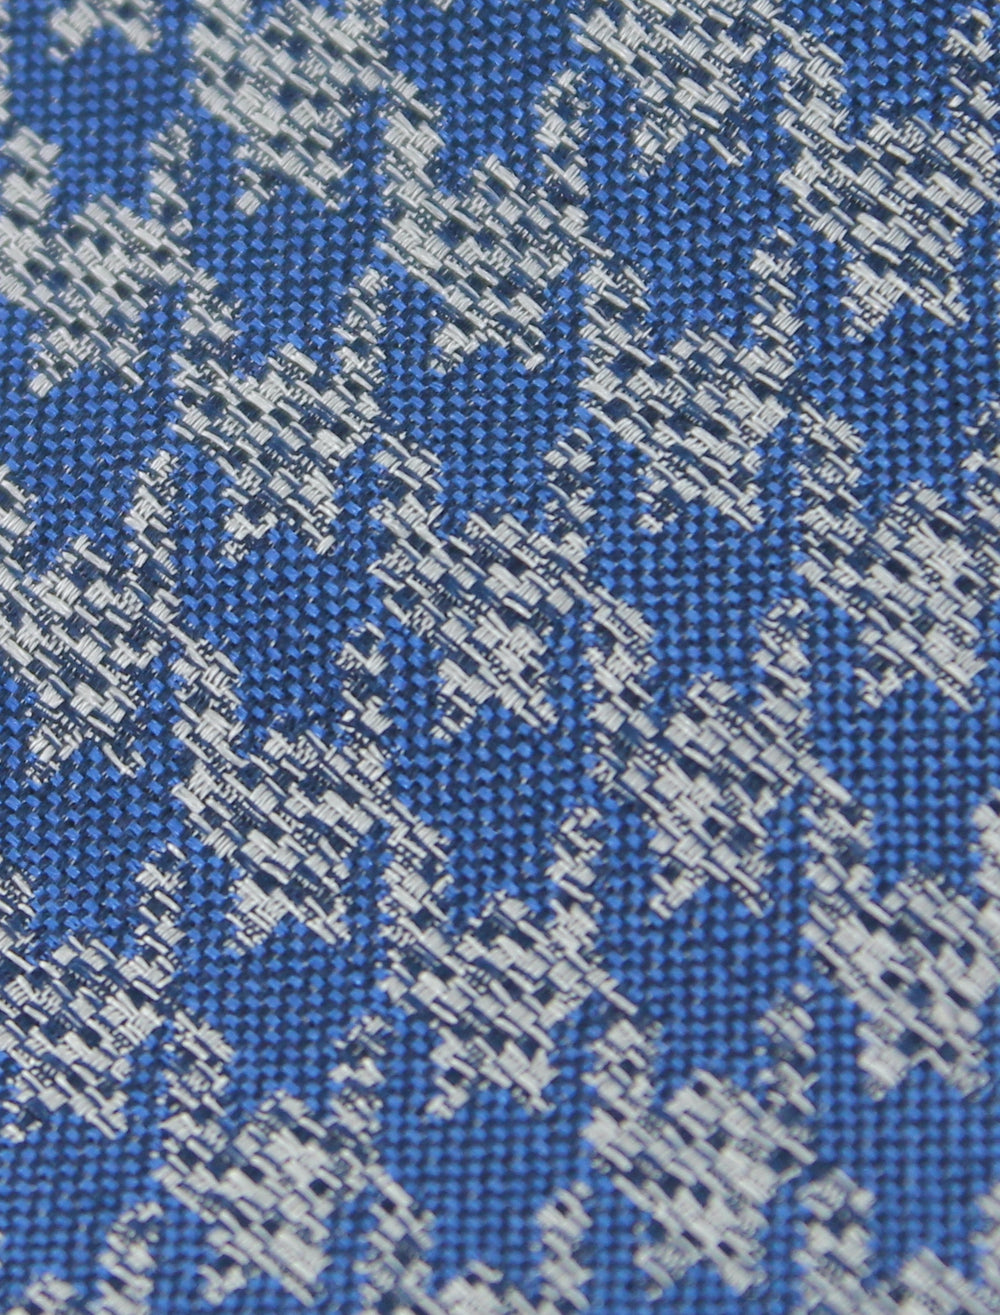 Blue tie with gray patterns